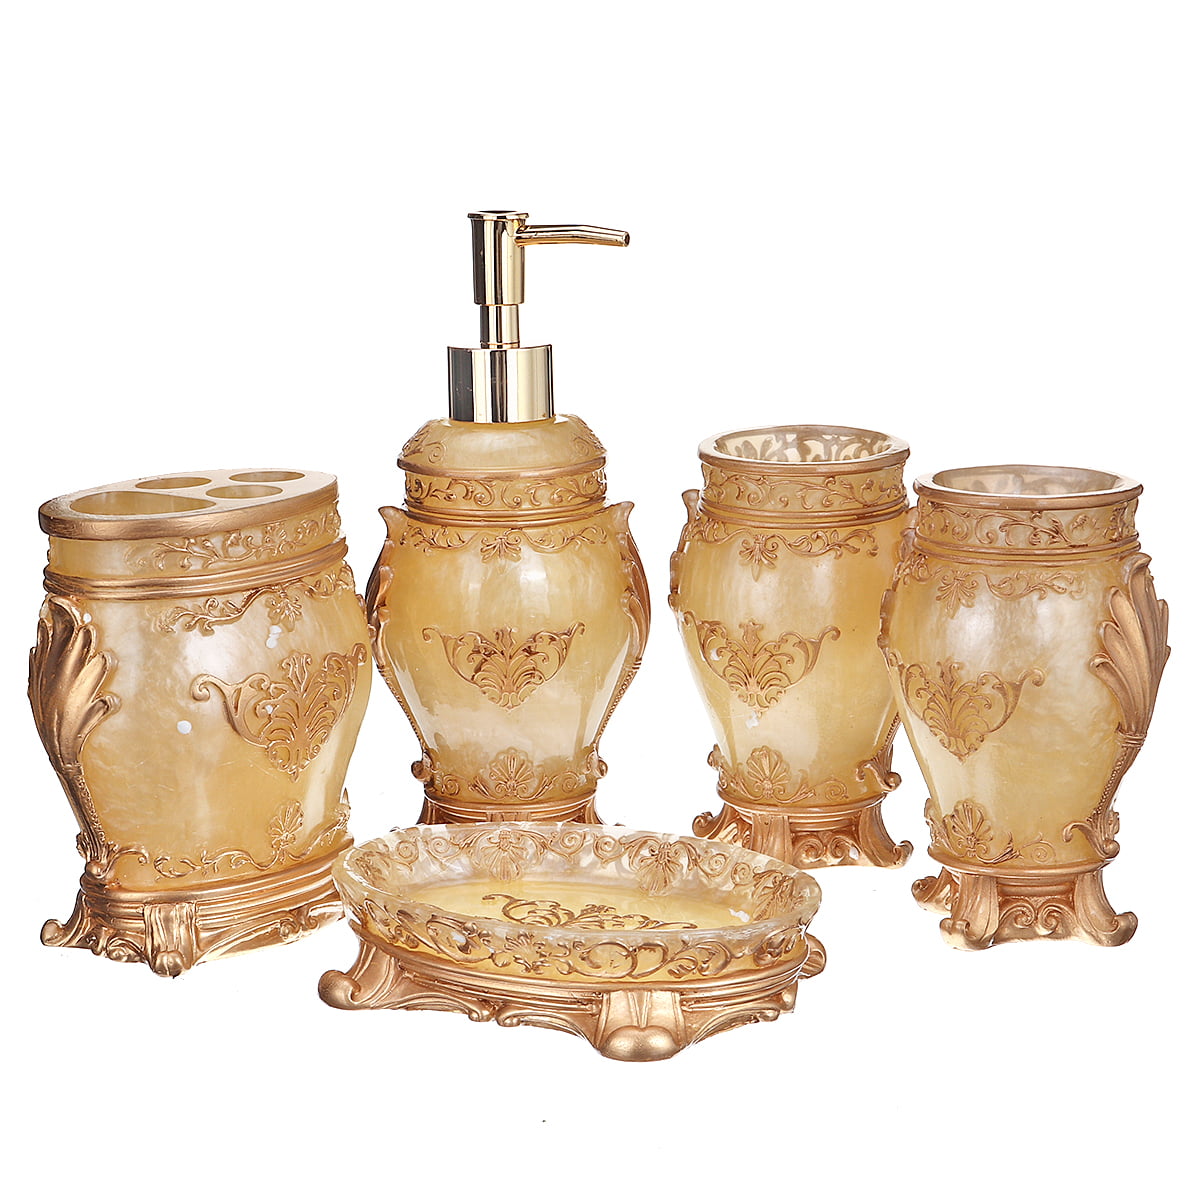 SINGES 5-Piece Gold Bath Accessory Set | Includes Soap or Lotion Dispenser w/Toothbrush Holder, Tumbler, Soap Dish | Elegant And Beautiful Rome Aristocracy Bathroom Accessory Set| Golden - Walmart.com